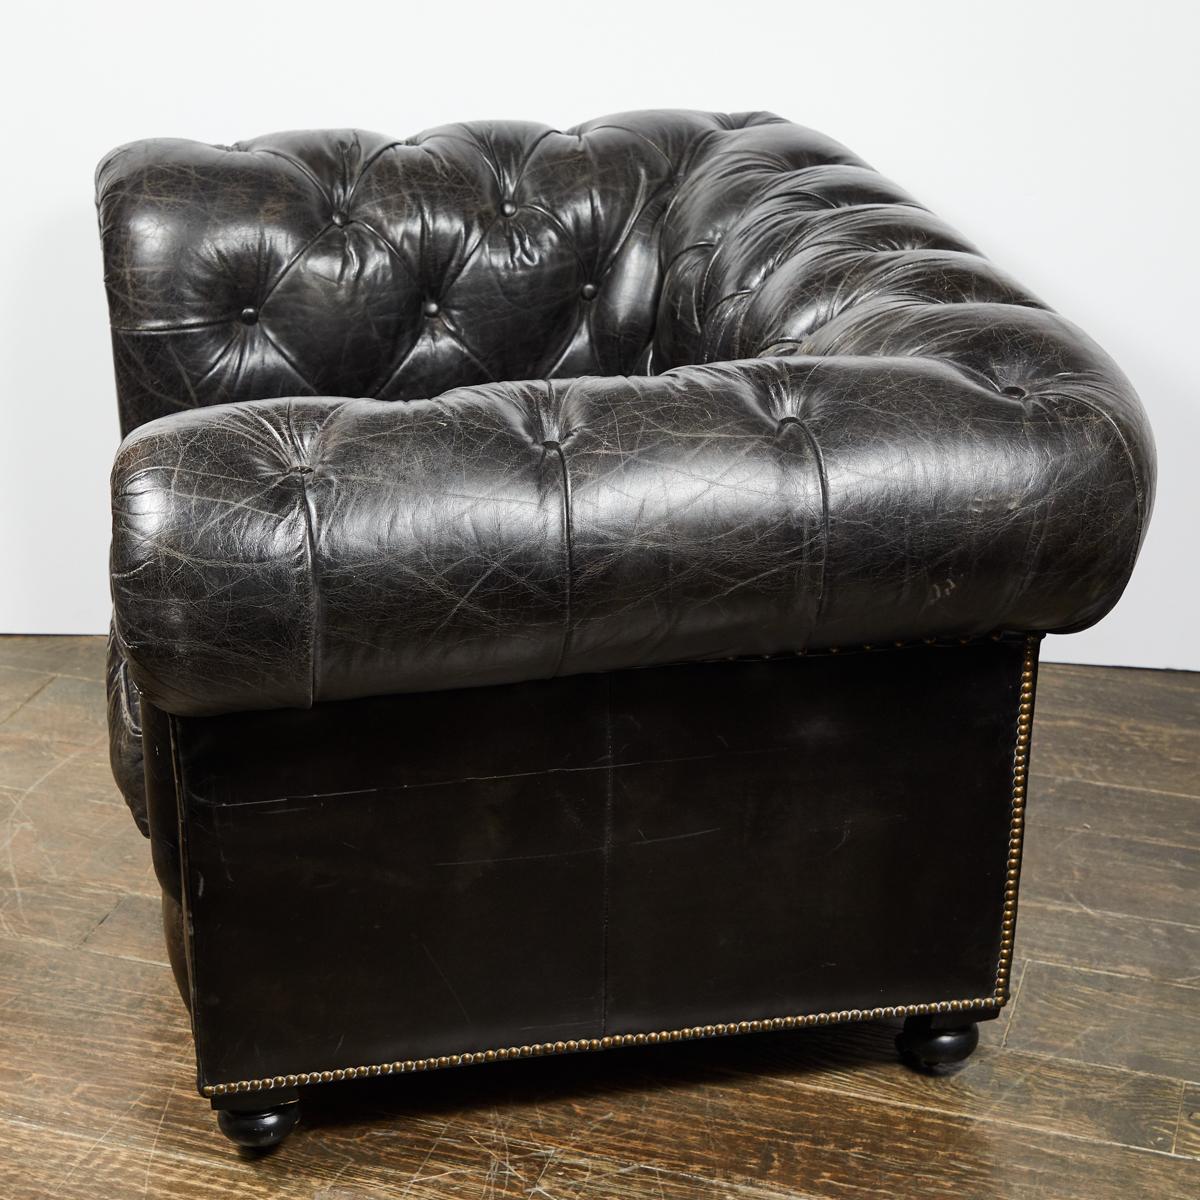 Chesterfield oversized tufted armchair in original black leather. Classic Chesterfield curved arms and wide seating.